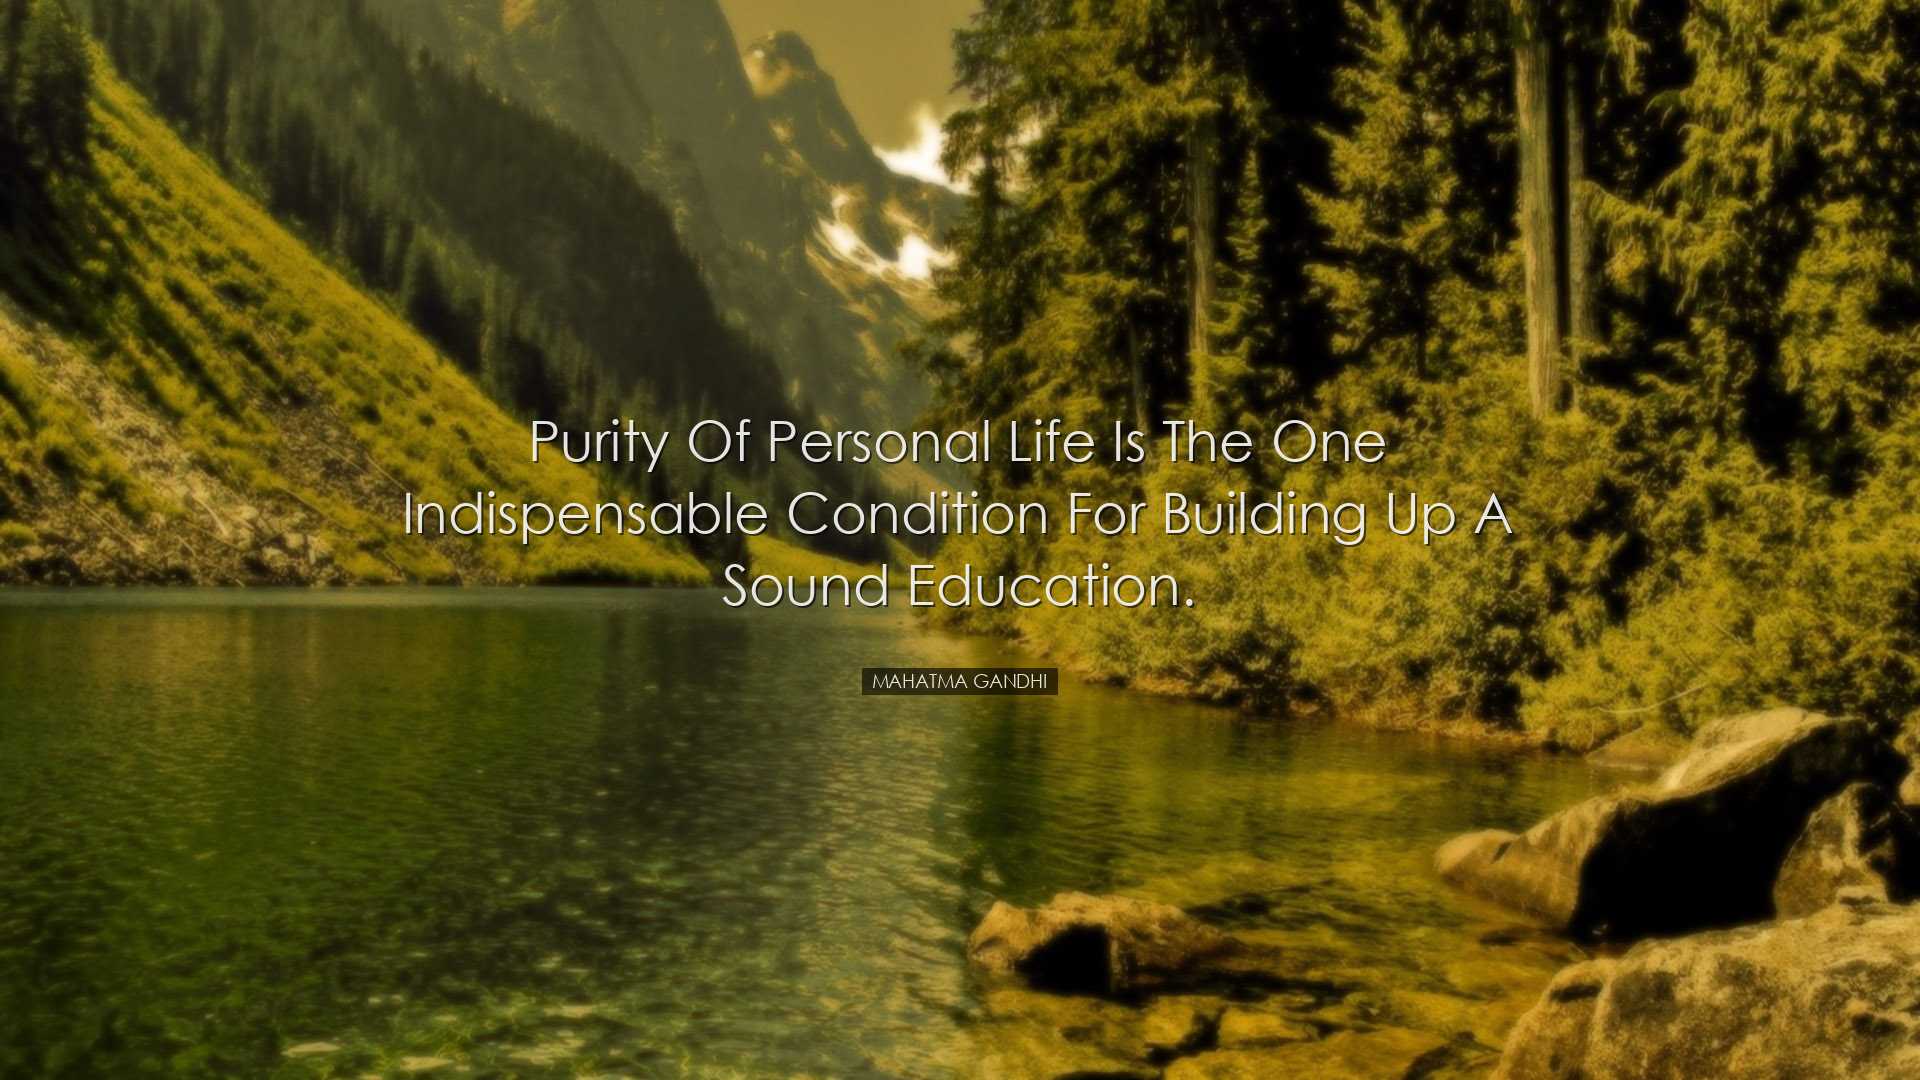 Purity of personal life is the one indispensable condition for bui